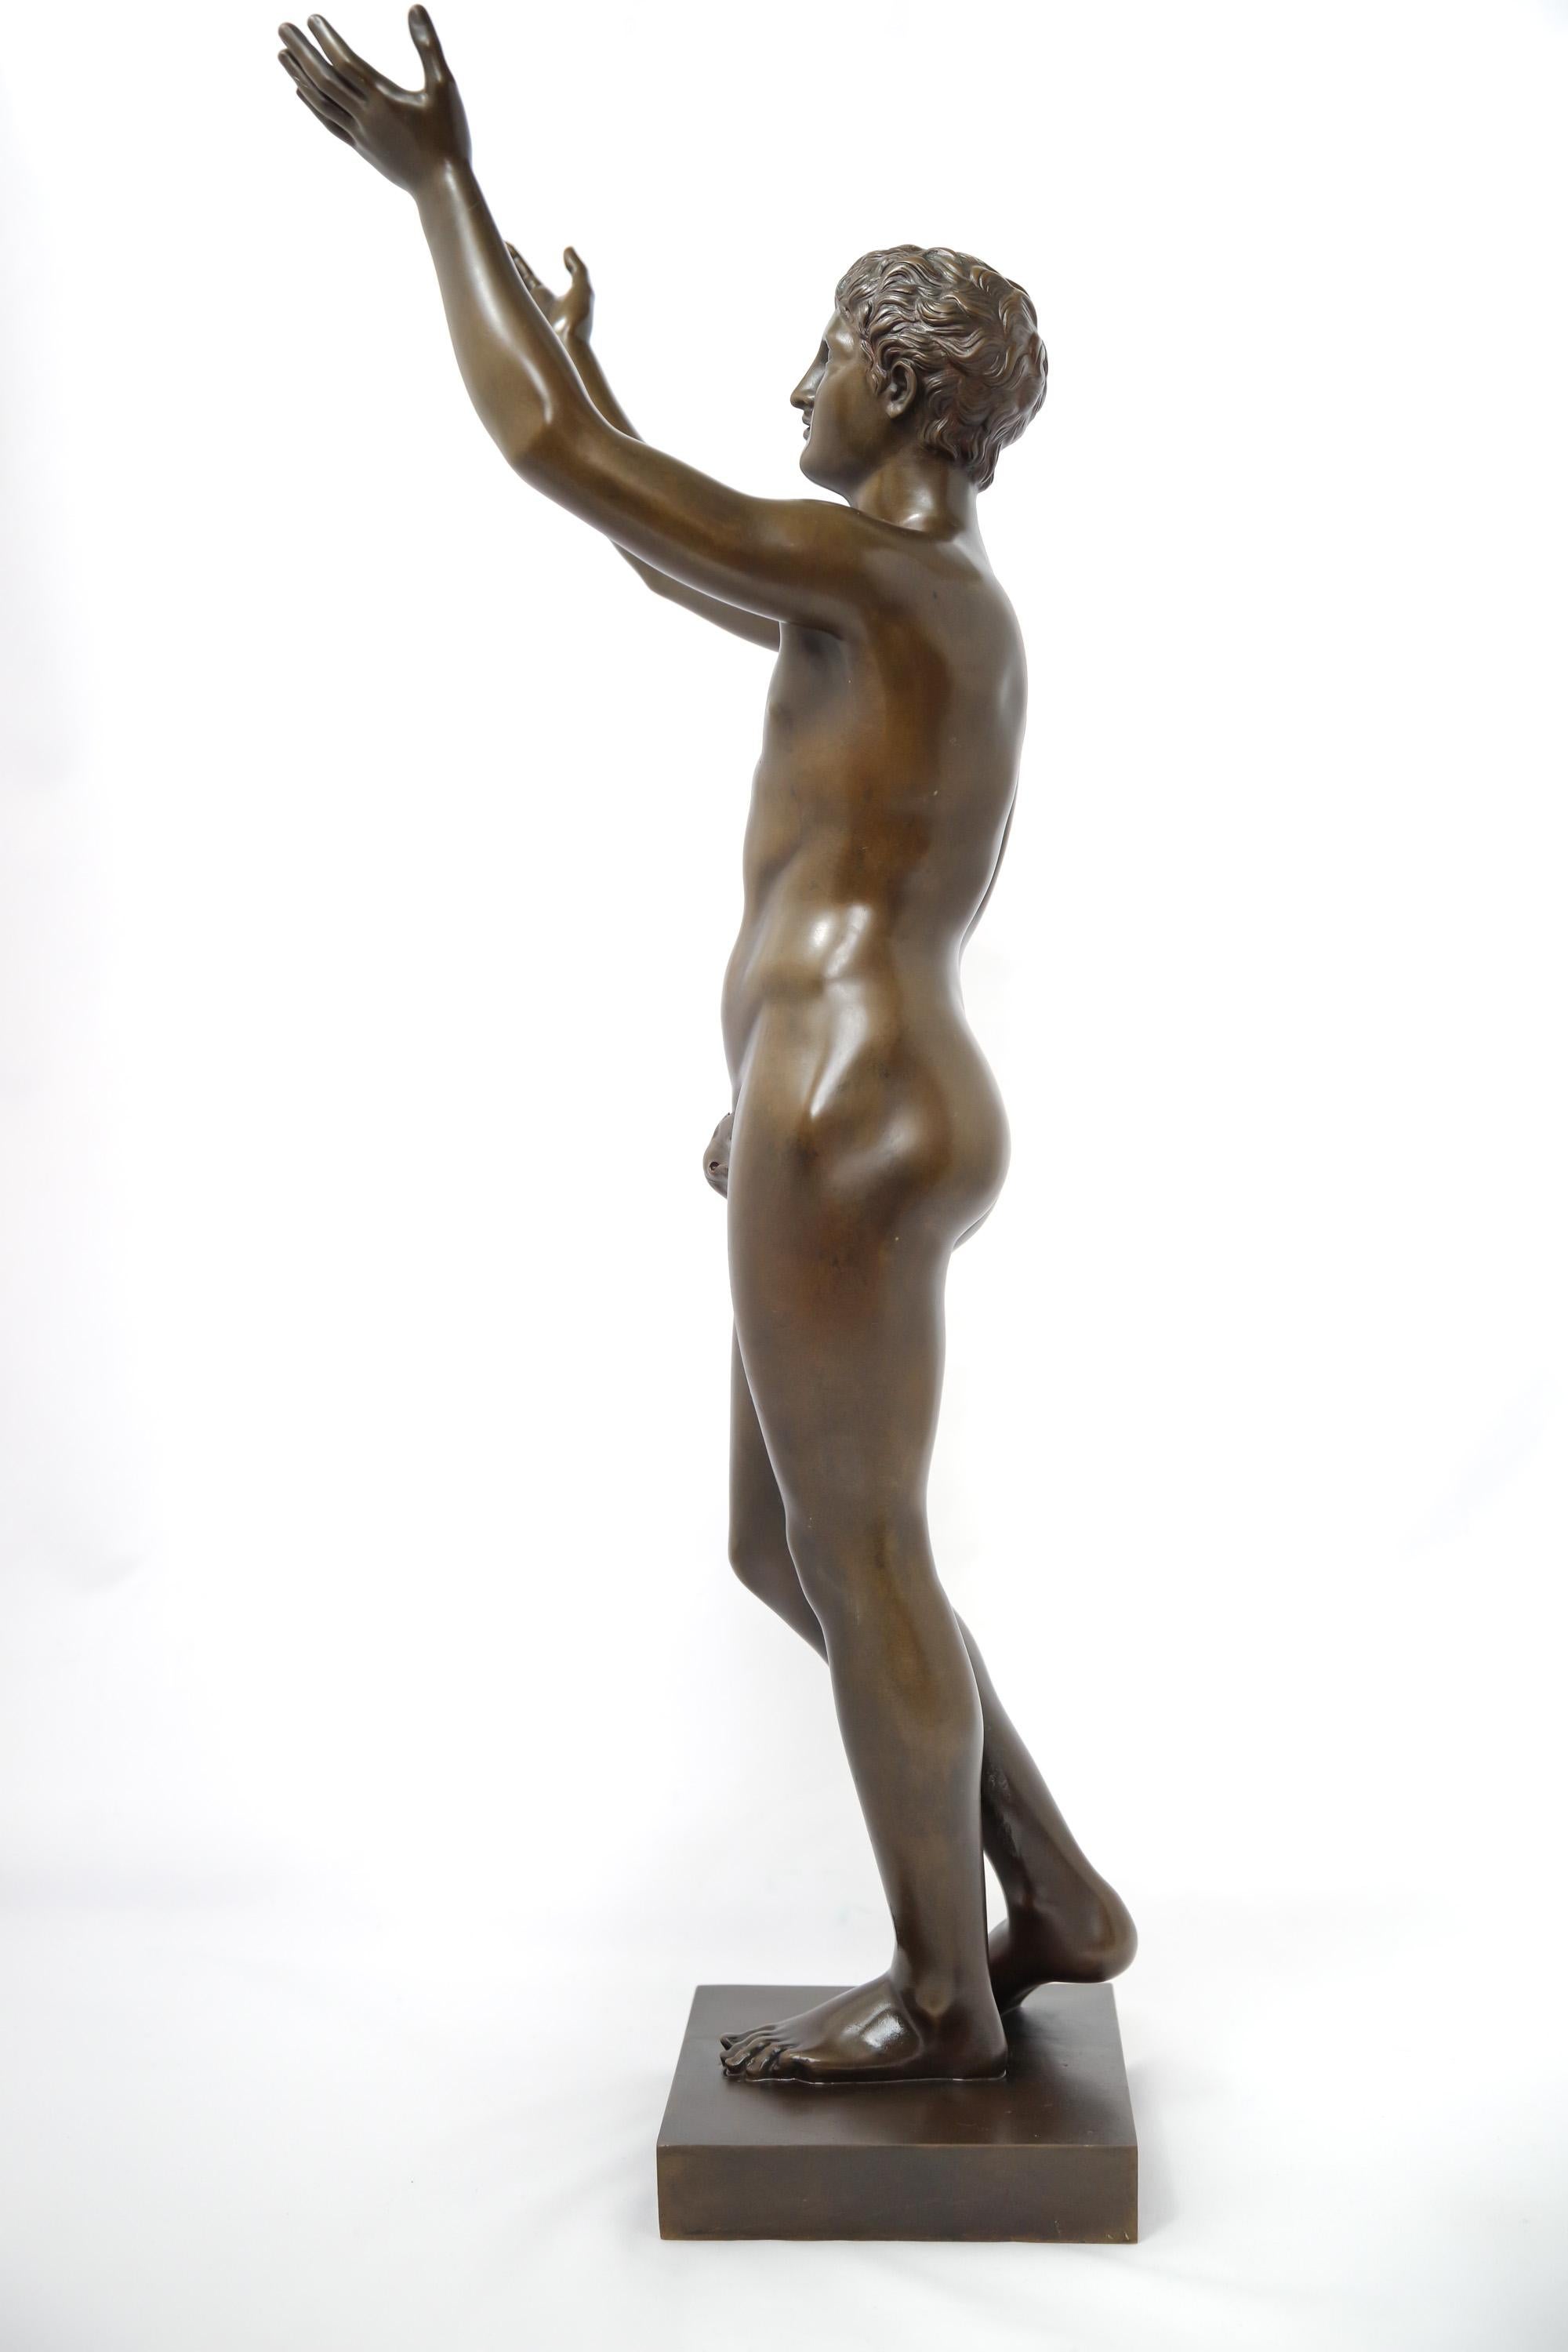 A 19th-century patinated bronze figure of the Berlin Adorante, or Praying Boy. The piece is a reduction of the Hellenistic-era original, currently in the Altes Museum in Berlin, by Lysippos or his circle. It depicts a boy standing on his left foot,